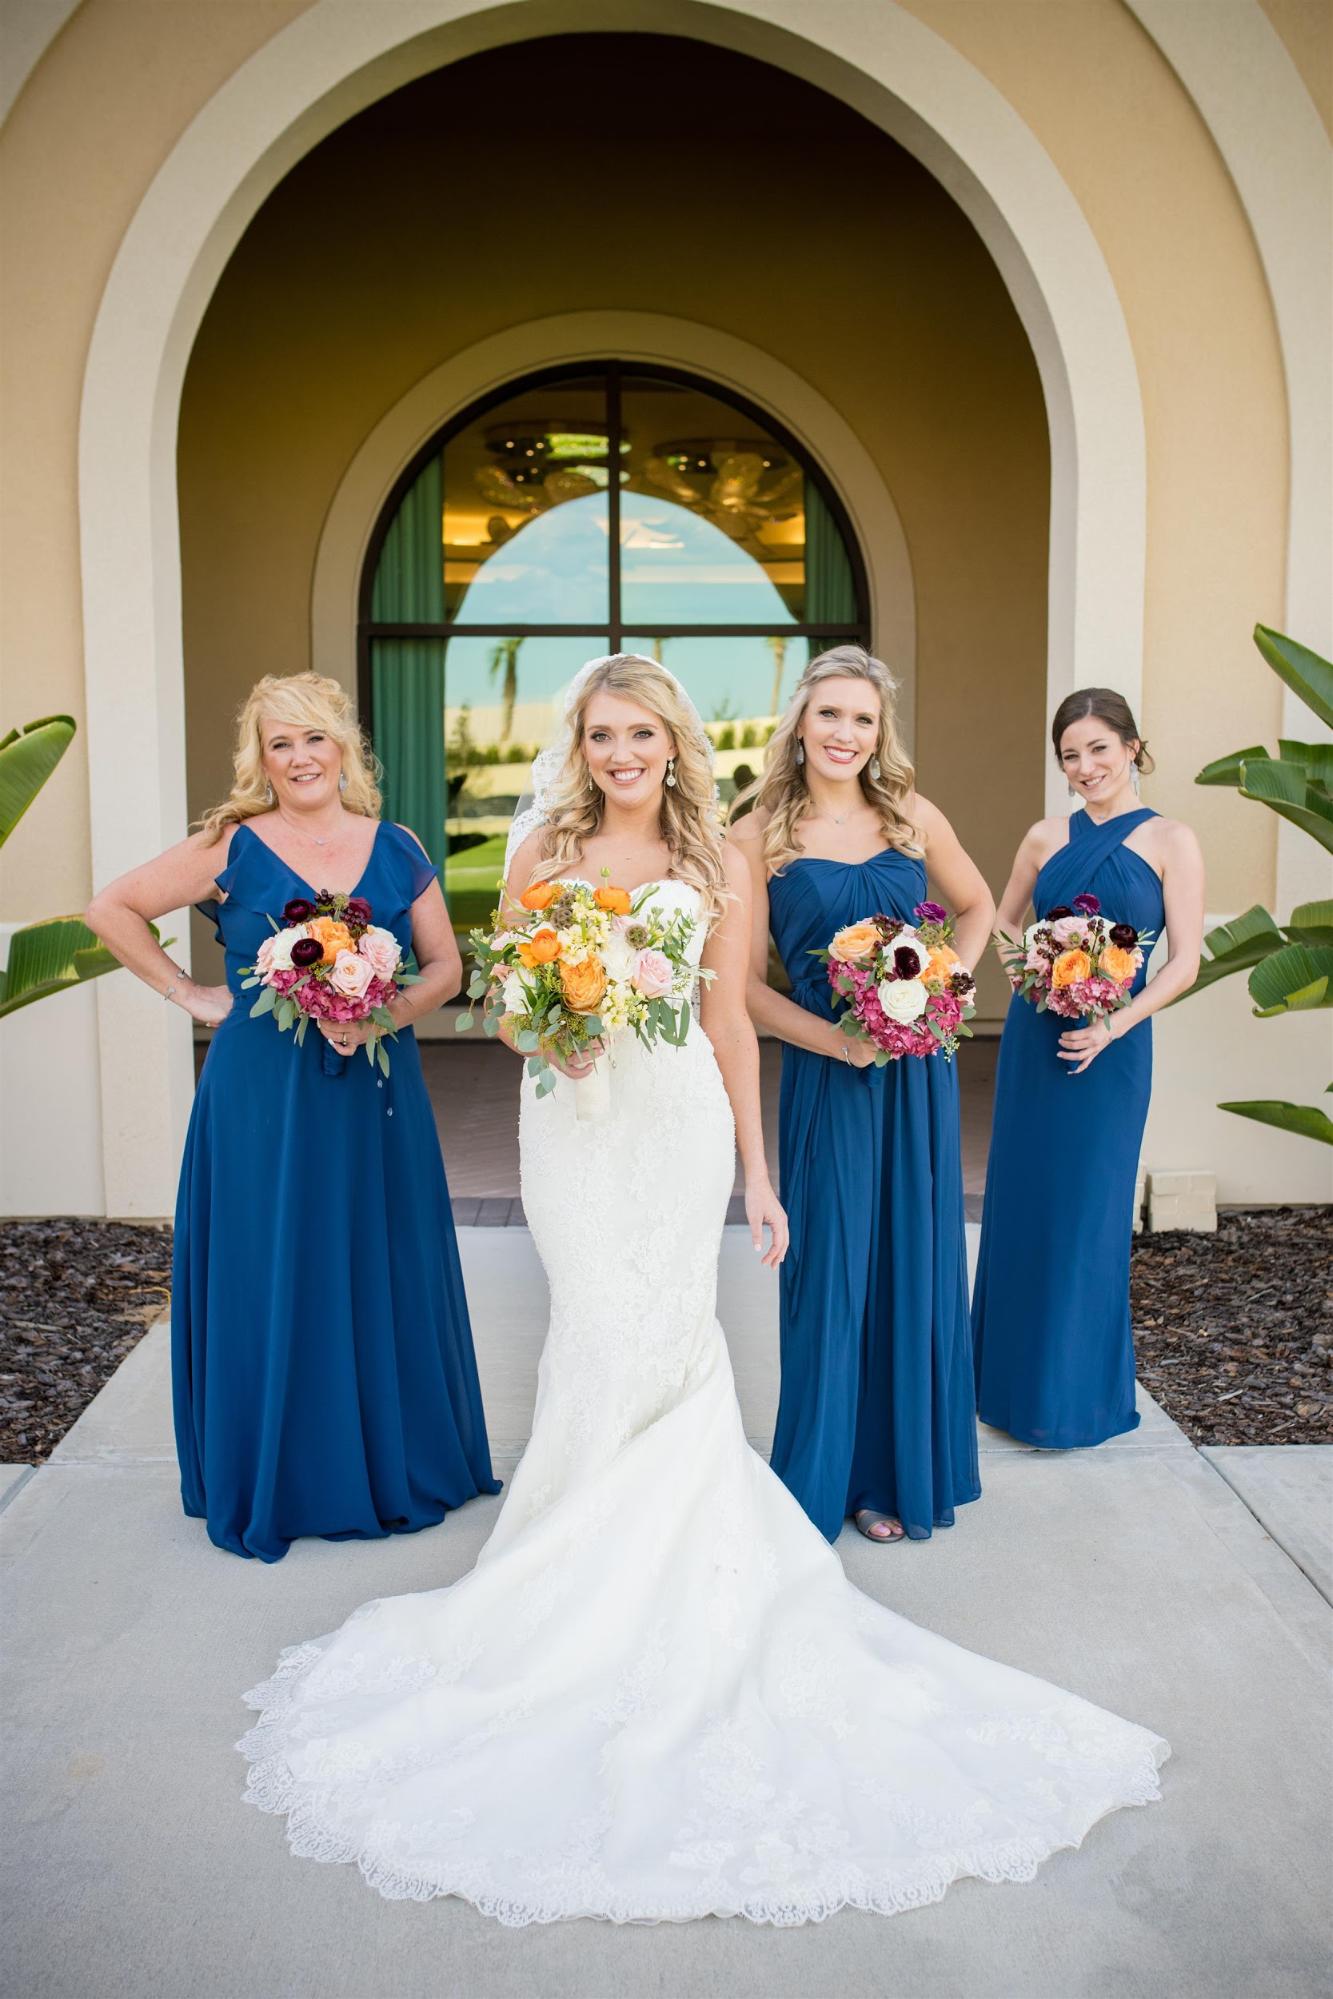 Not keen on a big, expensive wedding? We don't blame you one bit. Learn how to plan a small wedding that keeps the guest count low and the wow factor high! Dessy Real Wedding Photo by William Arthur Photography | Royal Blue Bridesmaid Dresses | Classic Blue Wedding